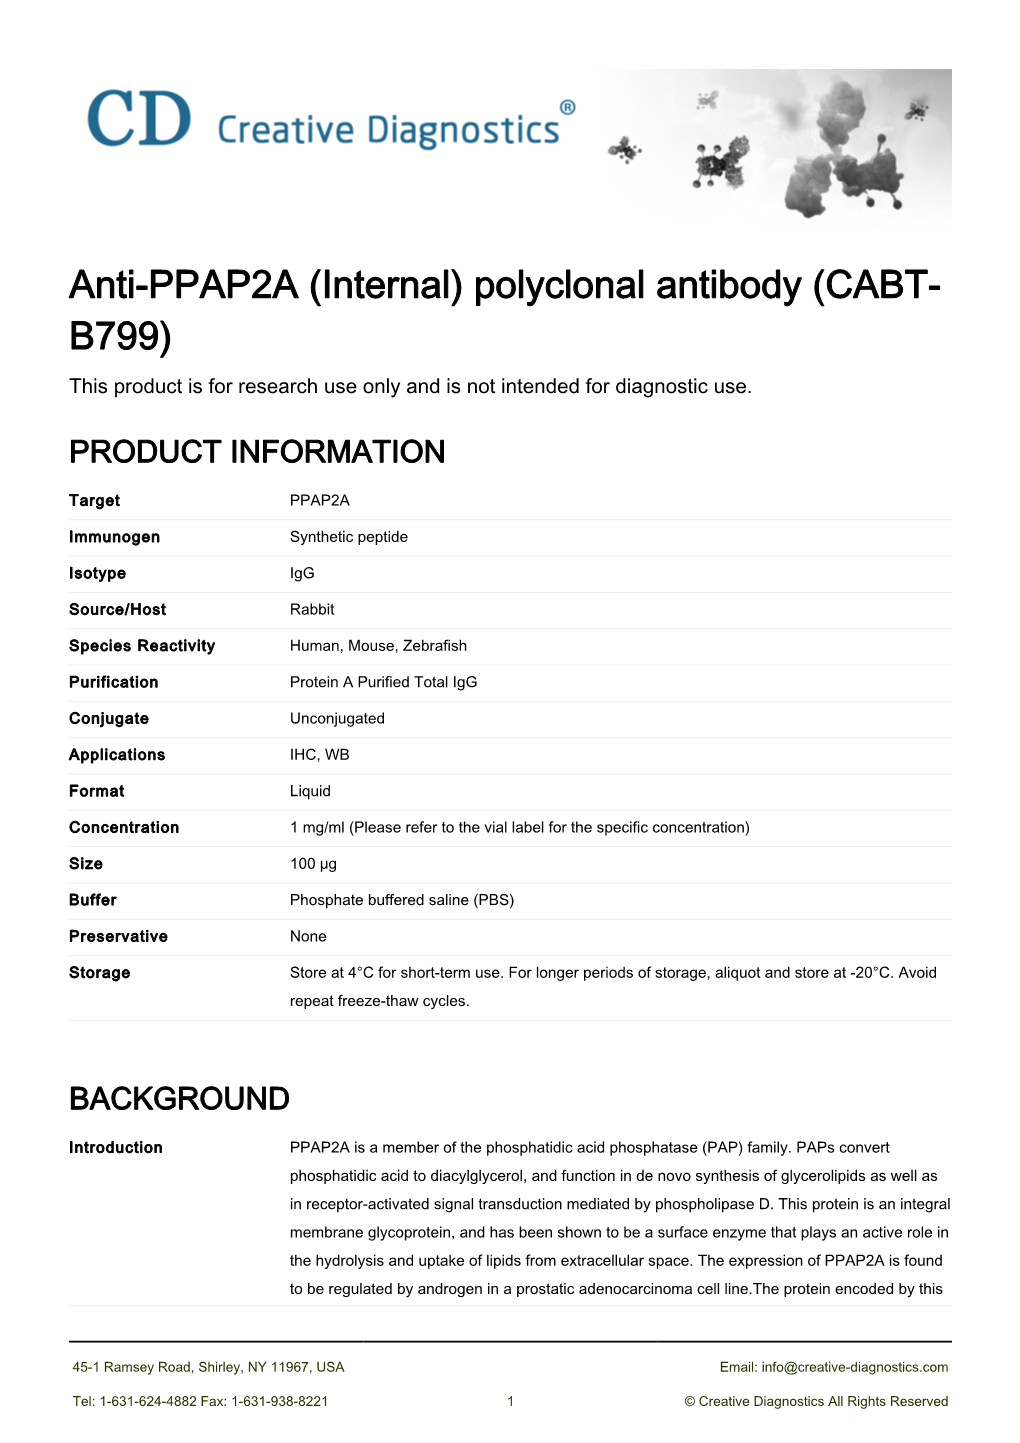 Anti-PPAP2A (Internal) Polyclonal Antibody (CABT- B799) This Product Is for Research Use Only and Is Not Intended for Diagnostic Use